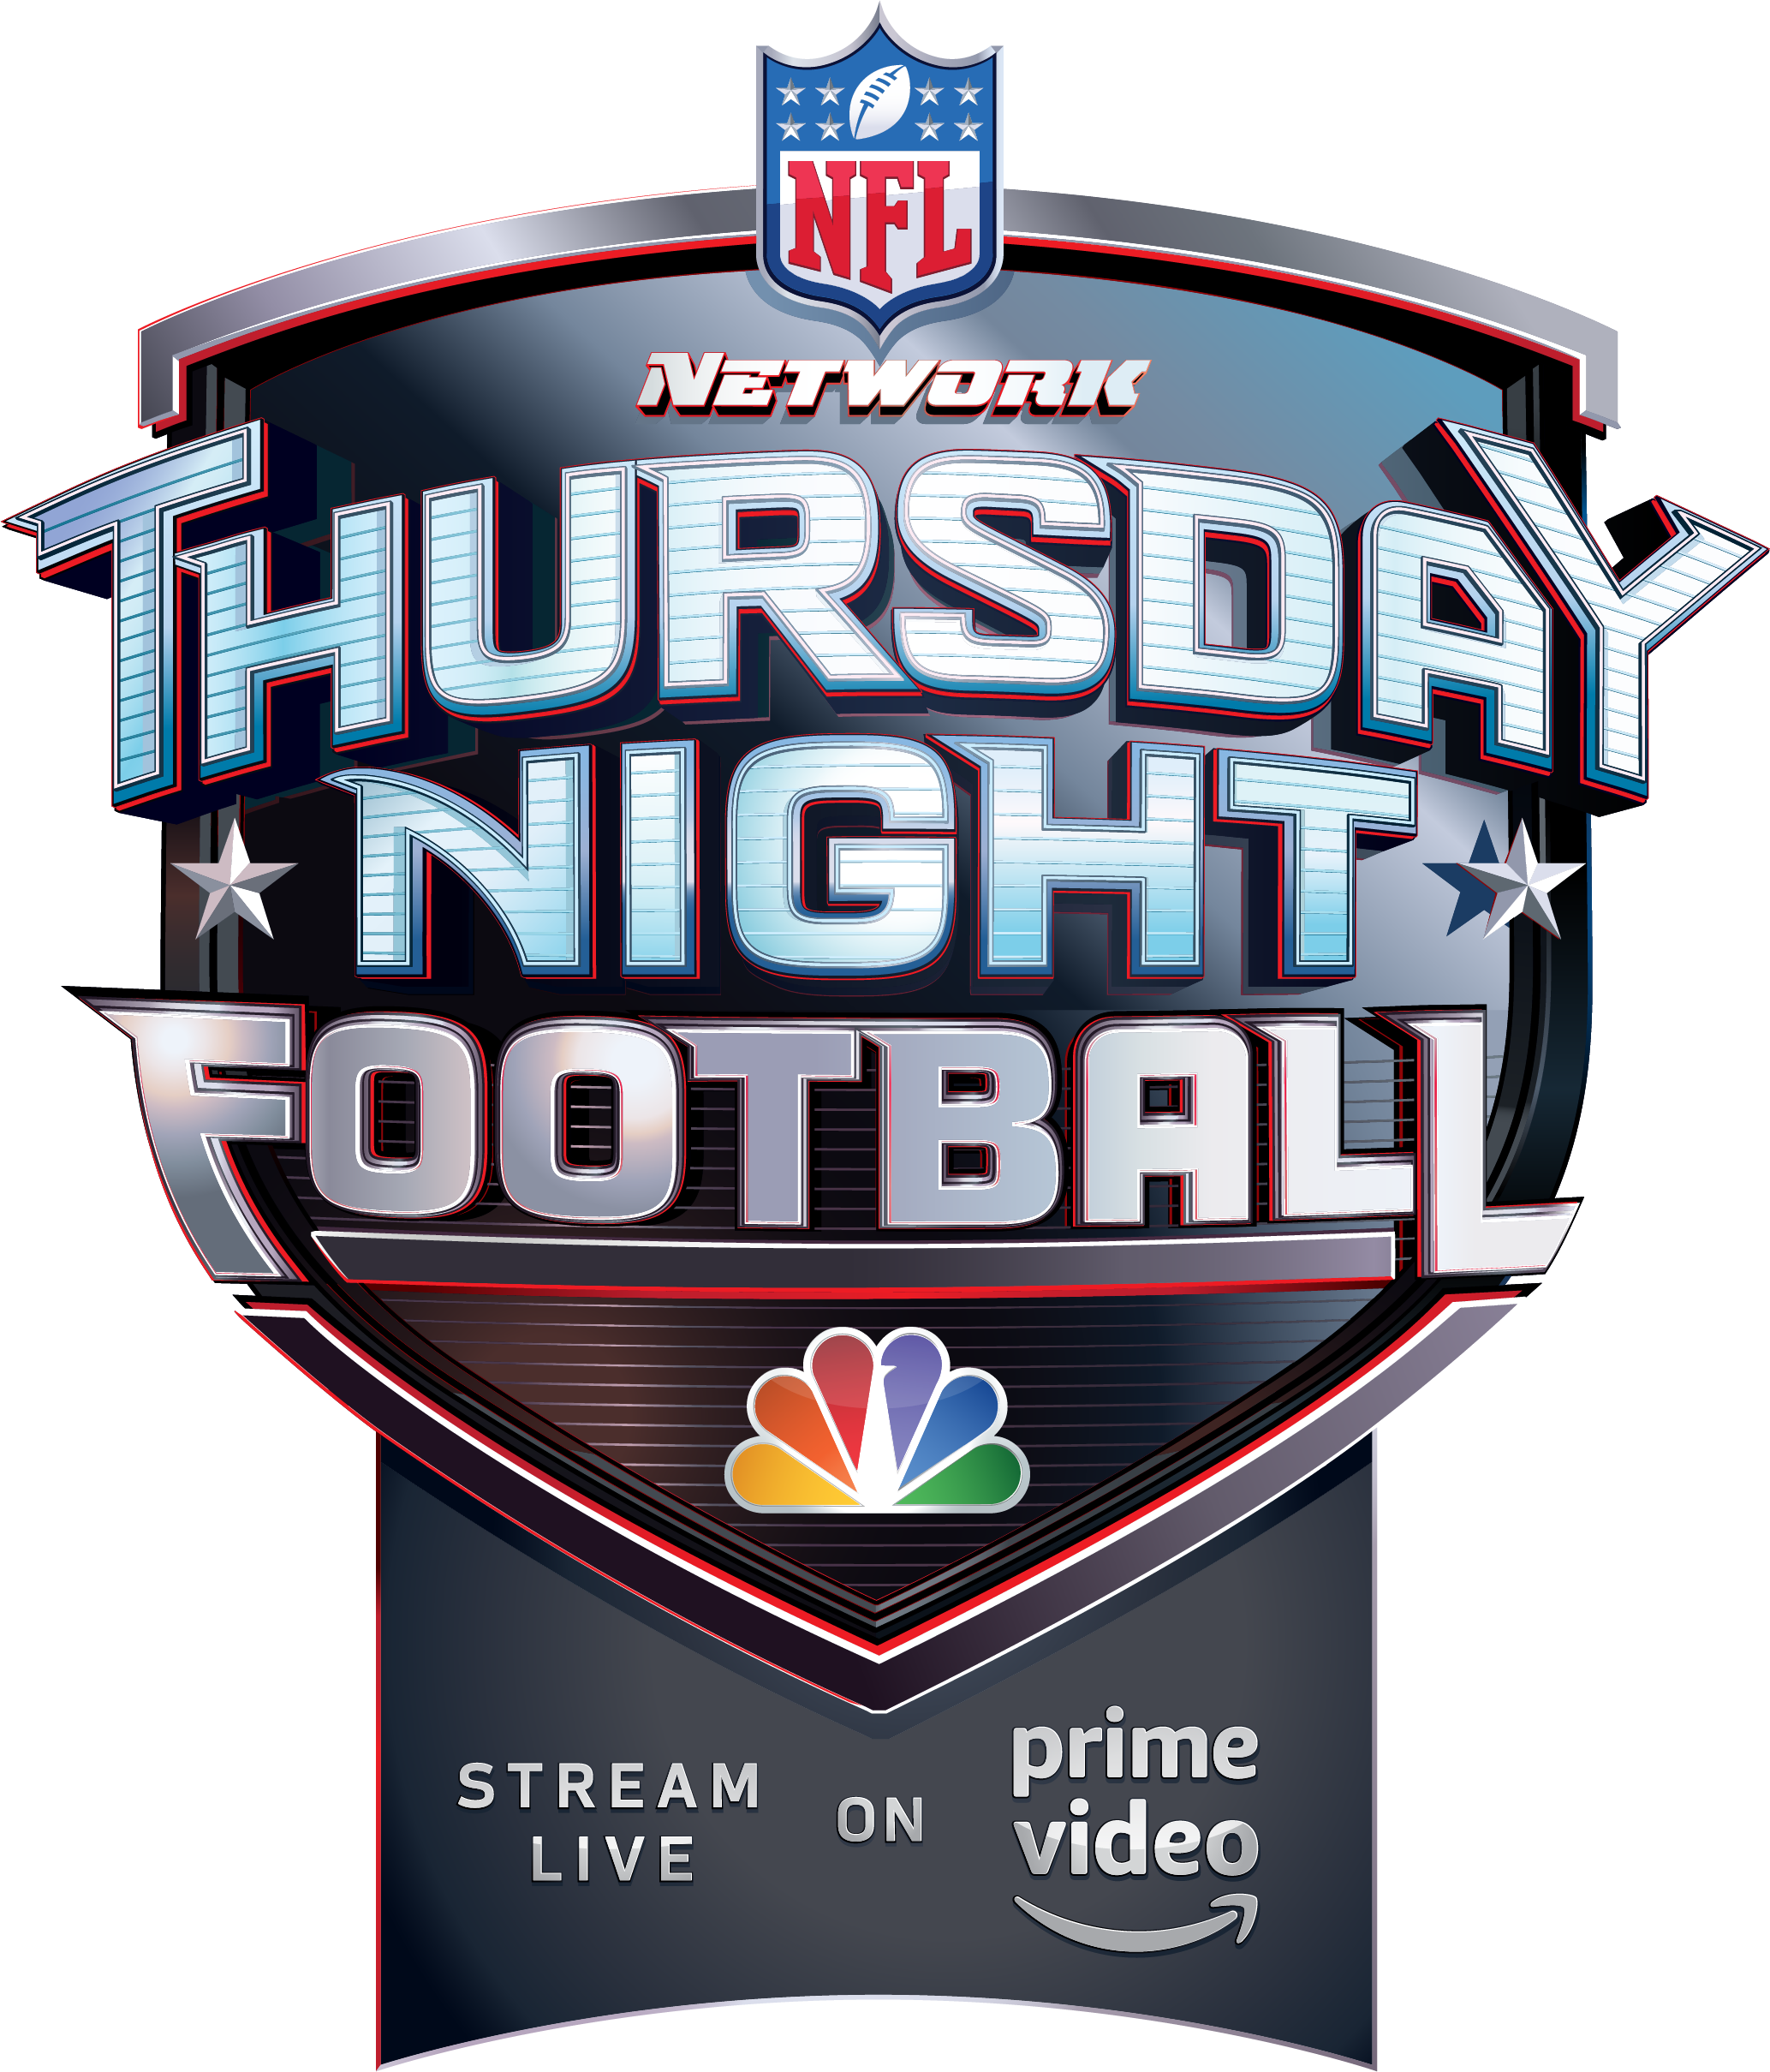 THURSDAY NIGHT FOOTBALL” ON NBC, NFL NETWORK, AMAZON PRIME VIDEO and UNIVERSO AVERAGES 13.8 MILLION VIEWERS ACROSS ALL PLATFORMS